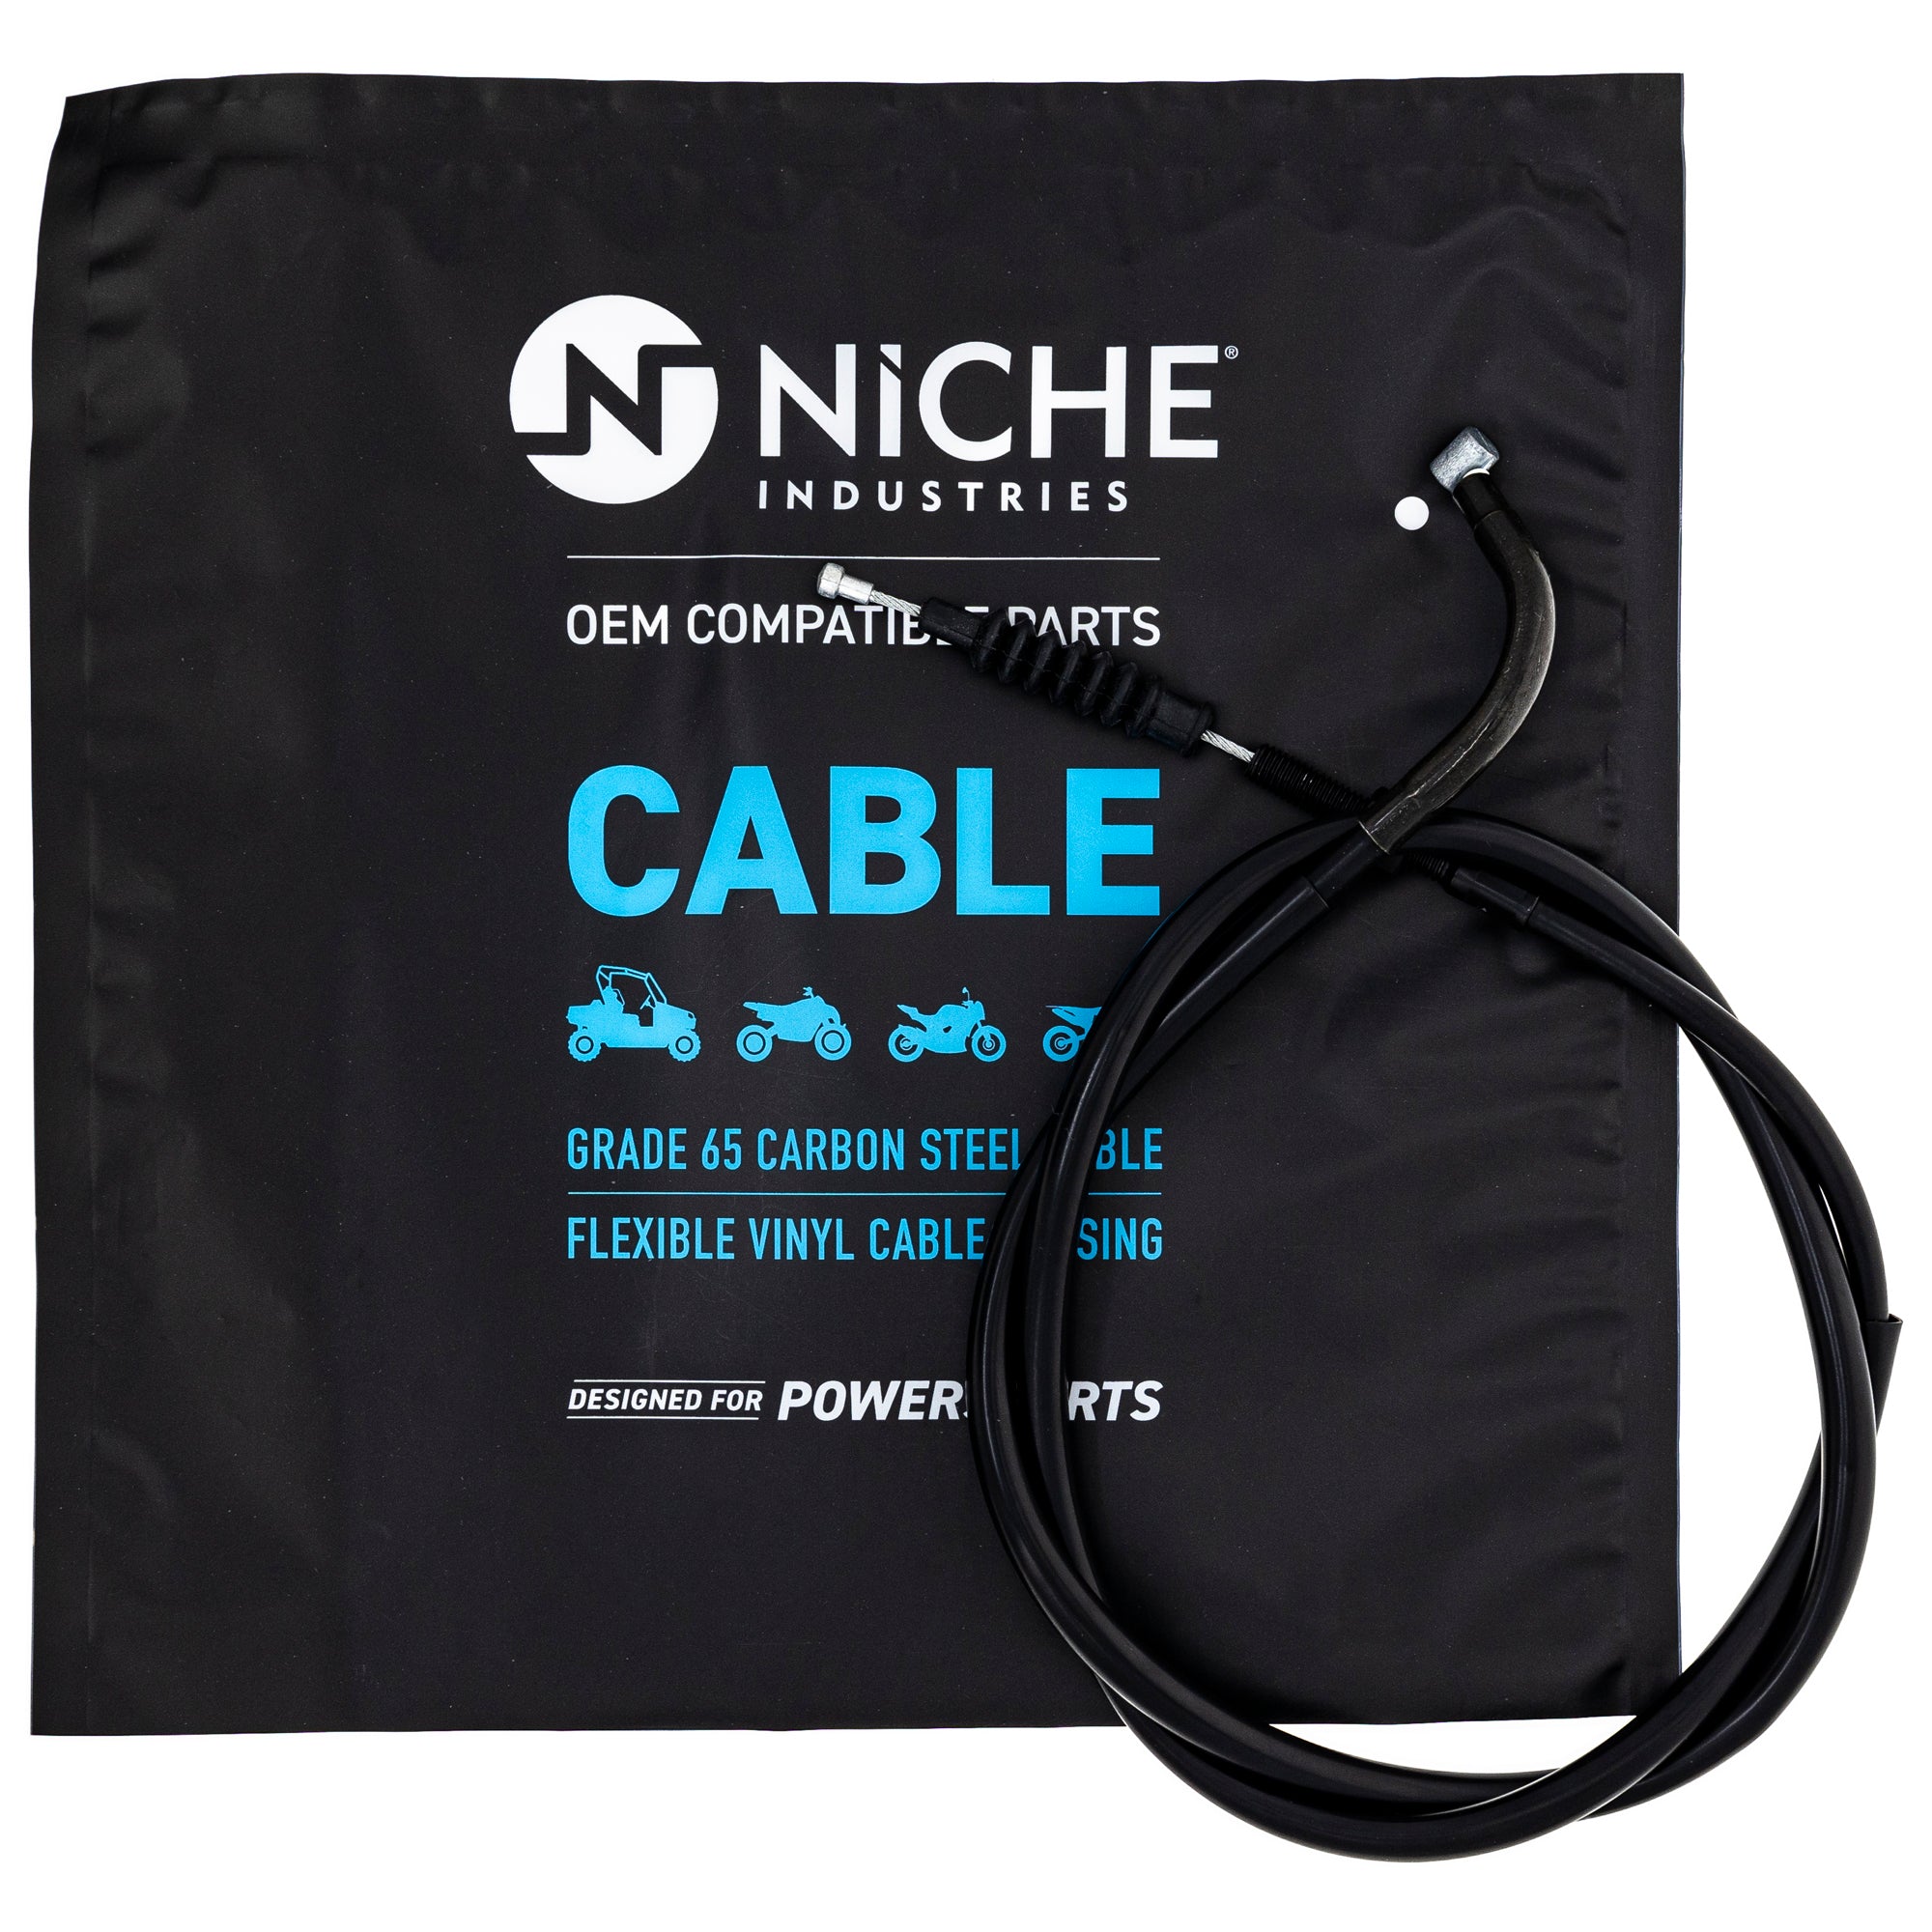 NICHE 519-CCB2373L Clutch Cable for zOTHER Ninja